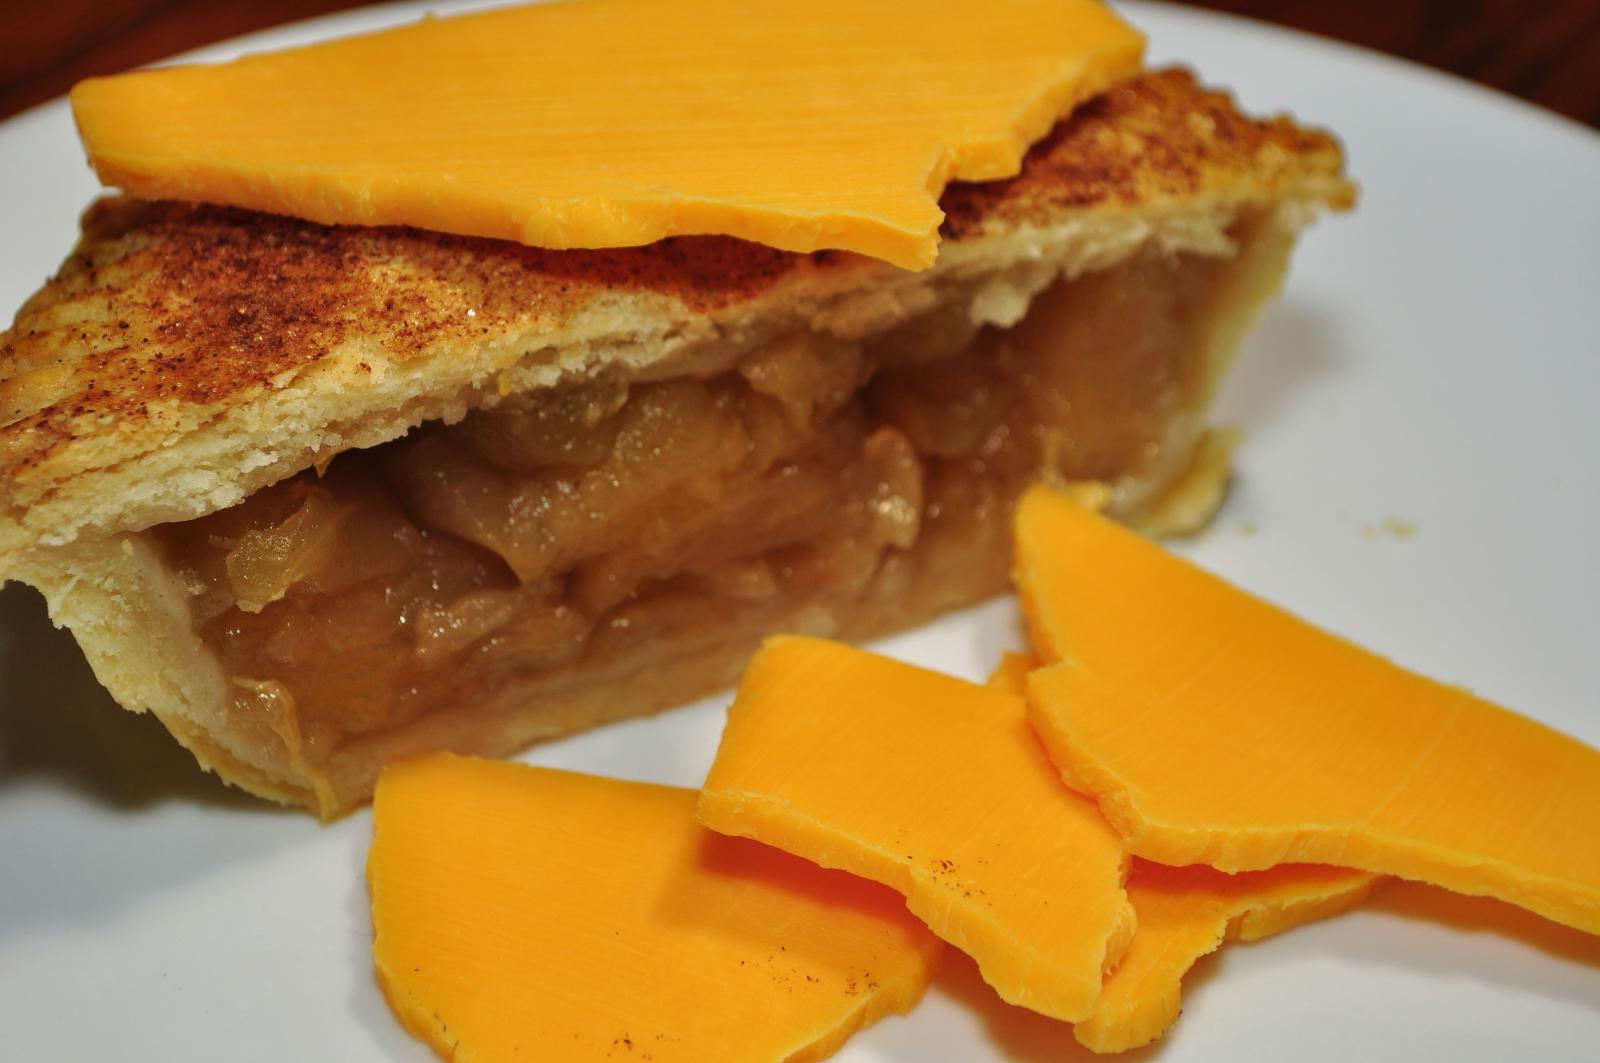 Mmm...cheddar_cheese_and_apple_pie_(5286947972).jpg